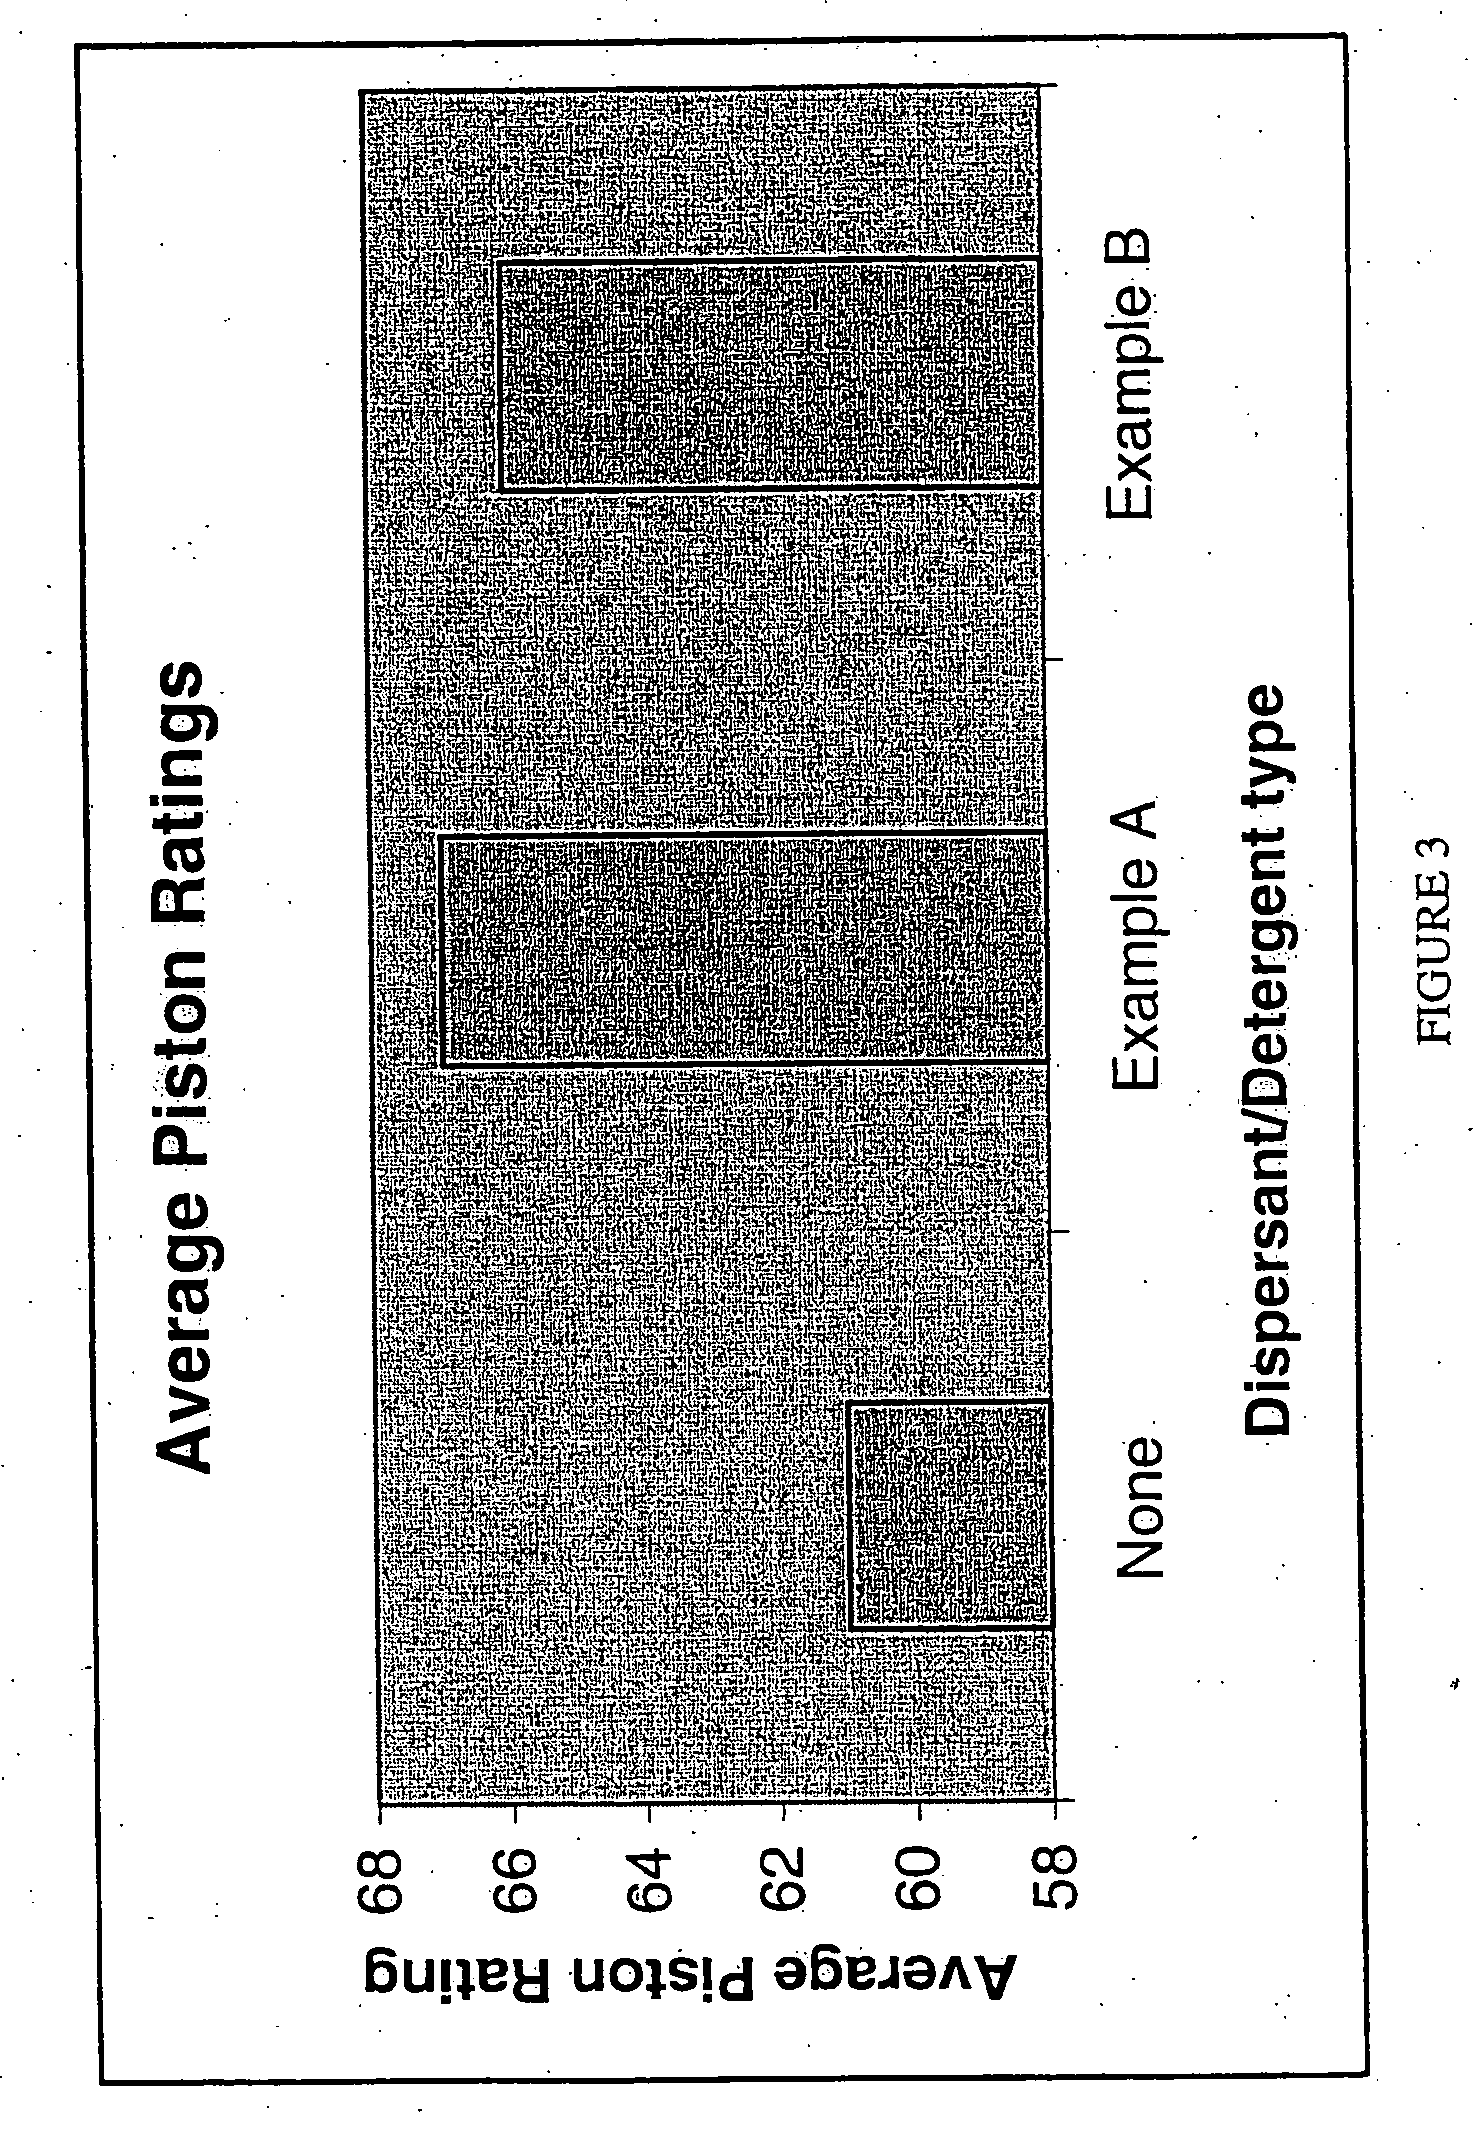 Method of operating internal combustion engine by introducing detergent into combustion chamber